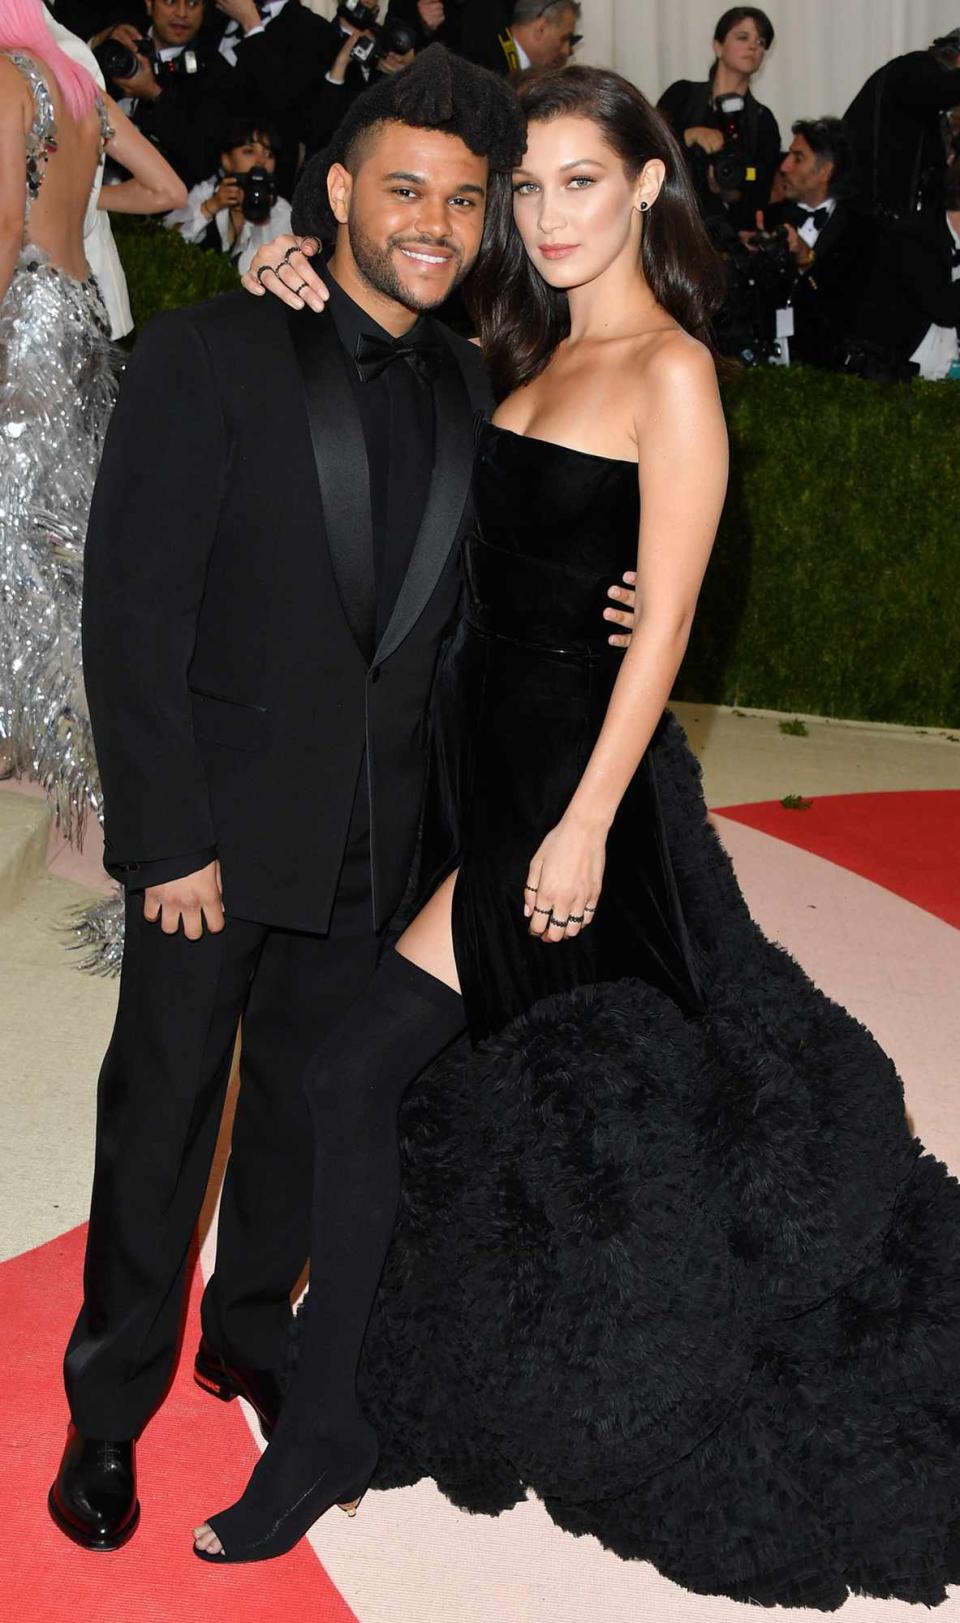 The Weeknd (L) and Bella Hadid attends the 'Manus x Machina: Fashion in an Age of Technology' Costume Institute Gala at the Metropolitan Museum of Art on May 2, 2016 in New York City